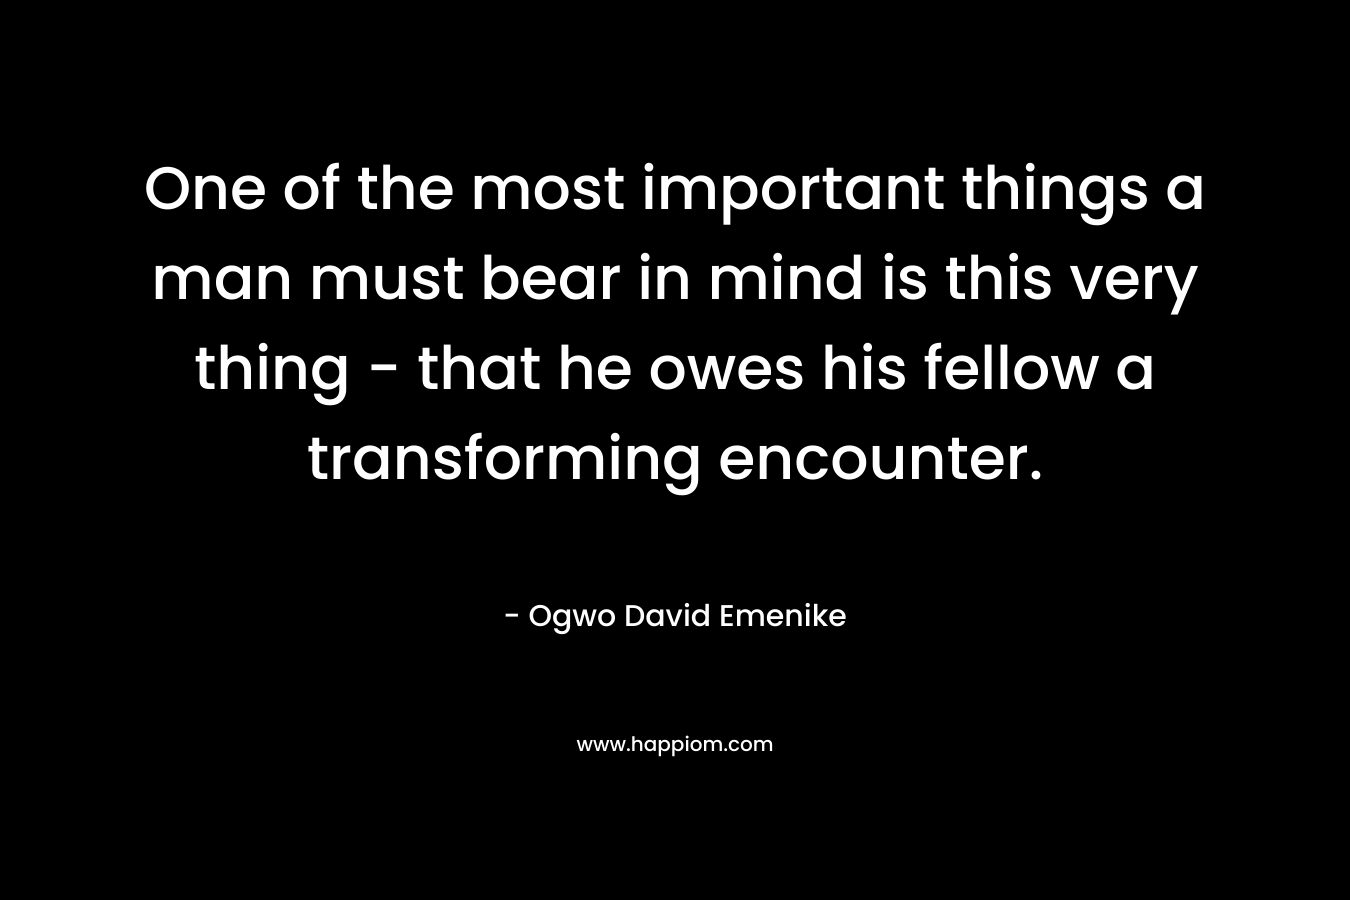 One of the most important things a man must bear in mind is this very thing – that he owes his fellow a transforming encounter. – Ogwo David Emenike